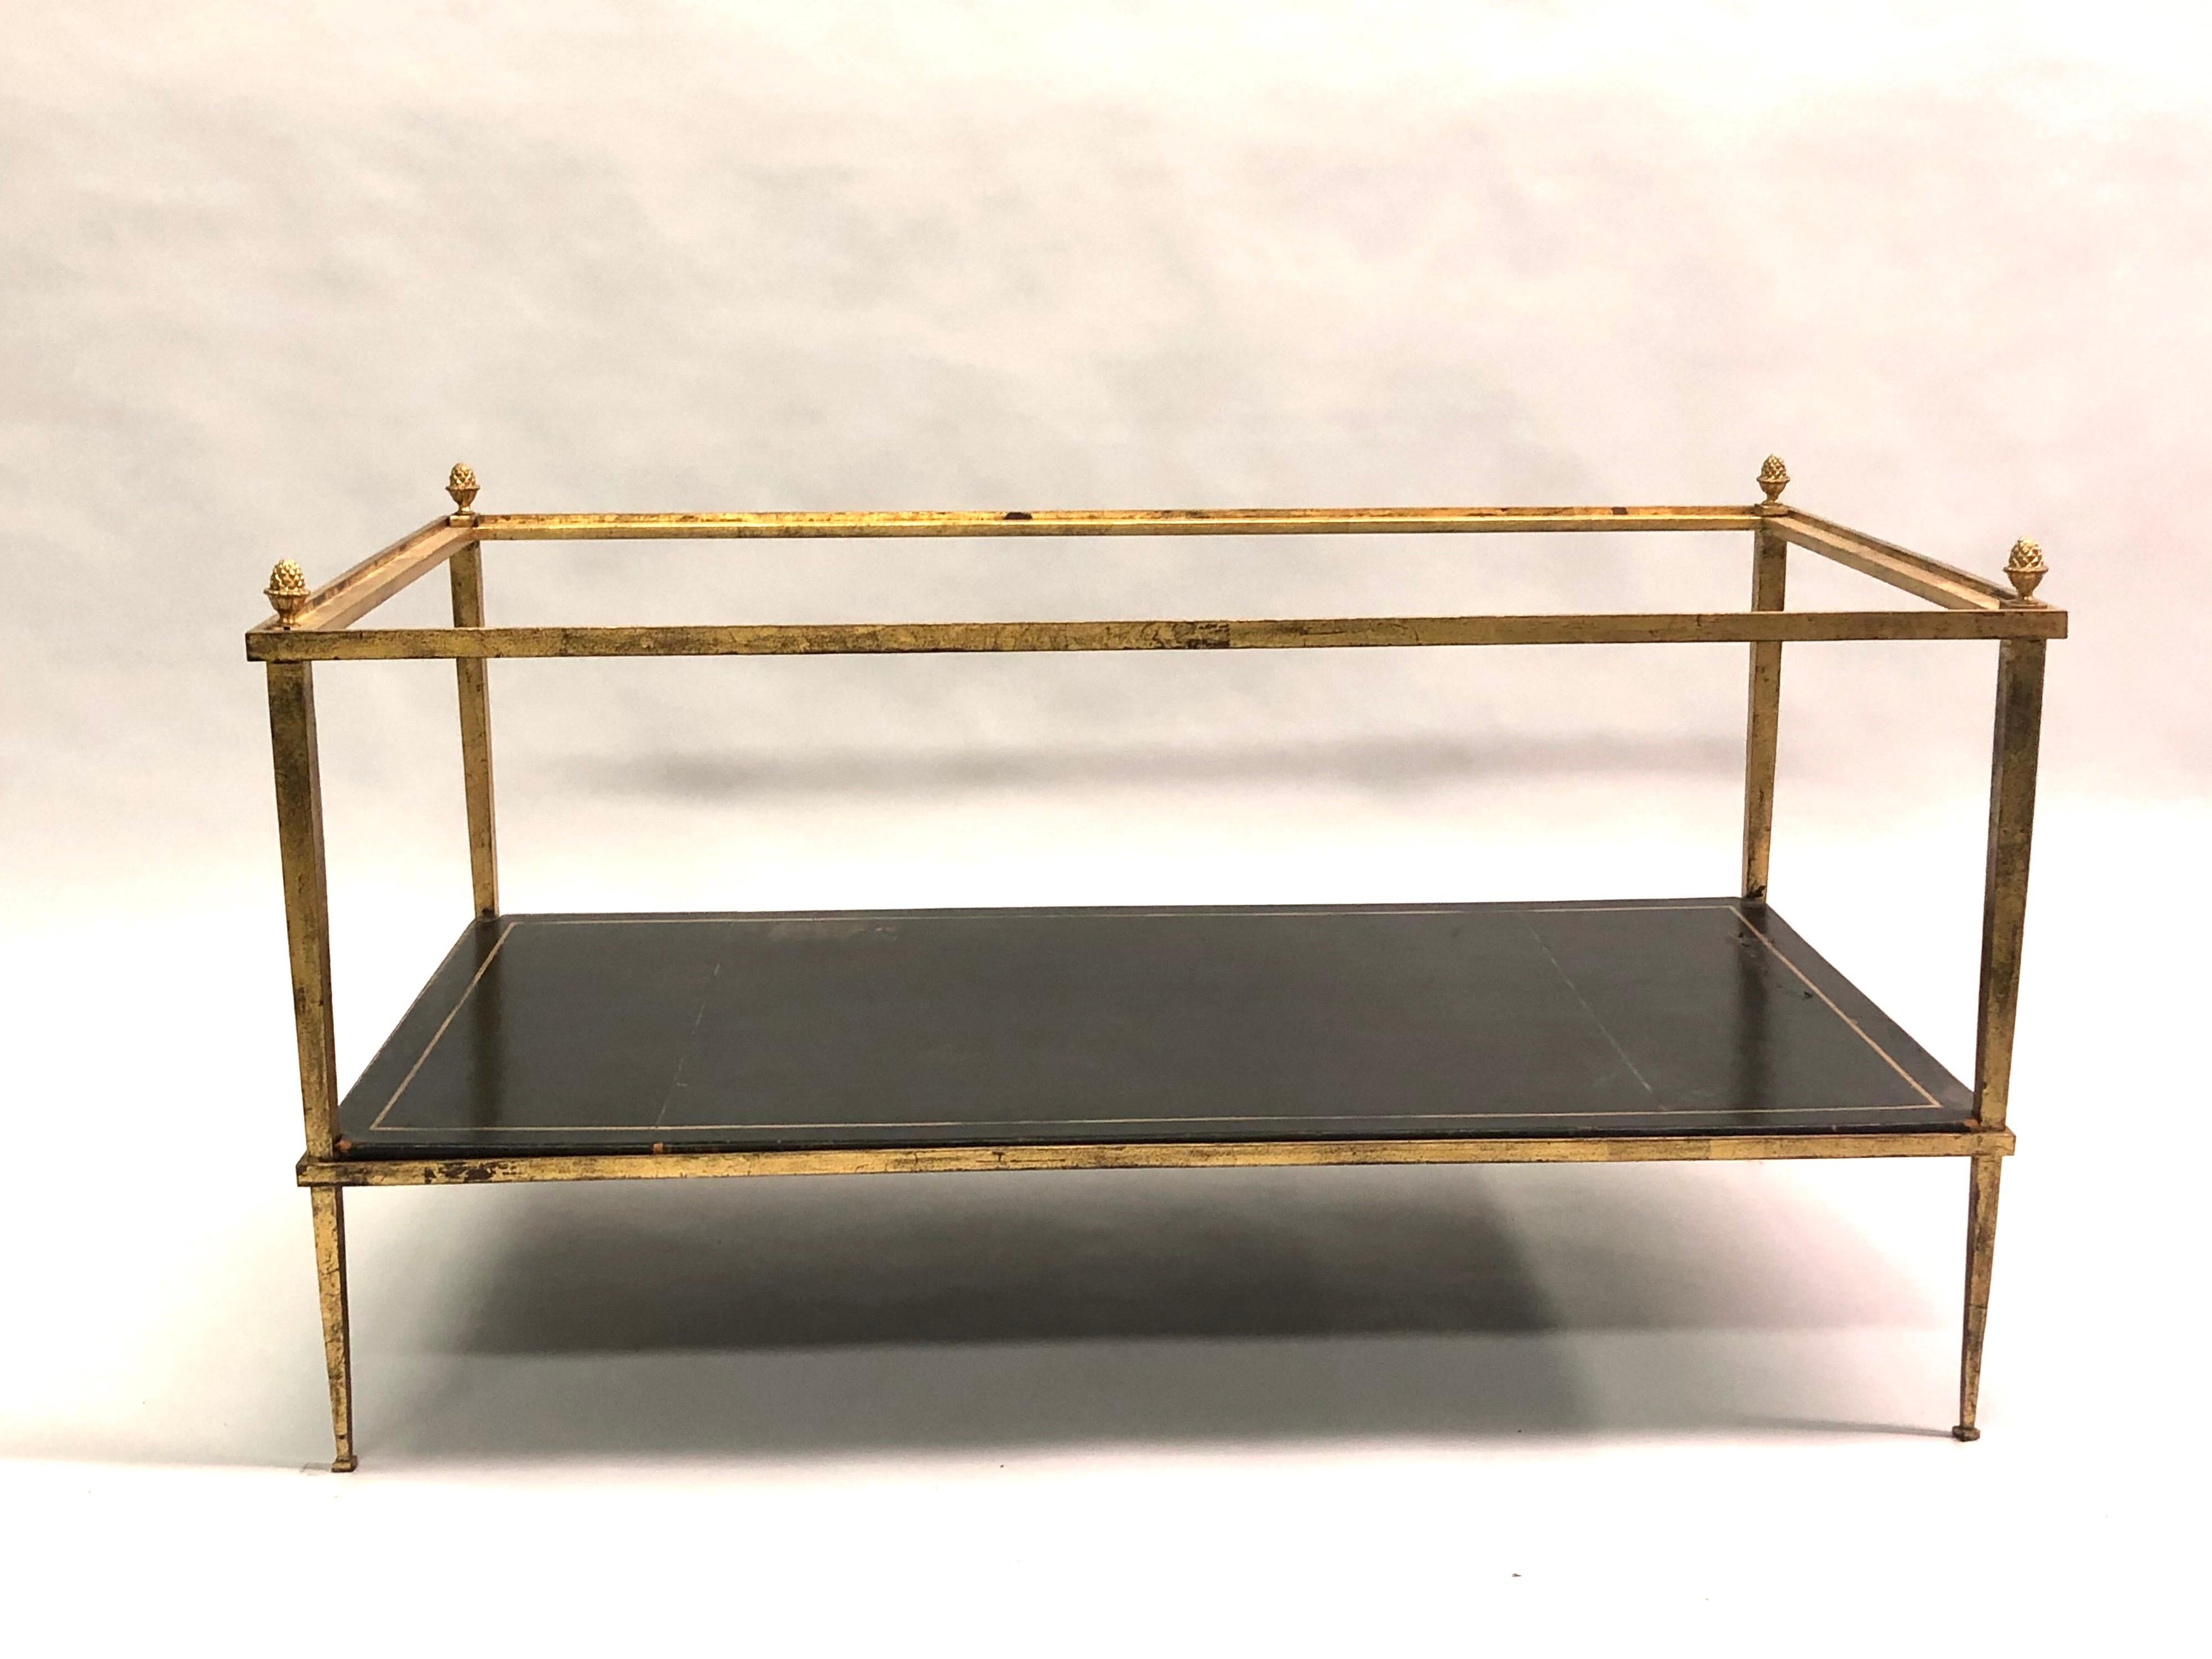 French double level modern neoclassical coffee table manufactured by Maison Ramsay for Maison Jansen in gilt iron with delicate line and tapered legs. The table features a gold embossed leather lower level, a clear glass upper level (not shown) and